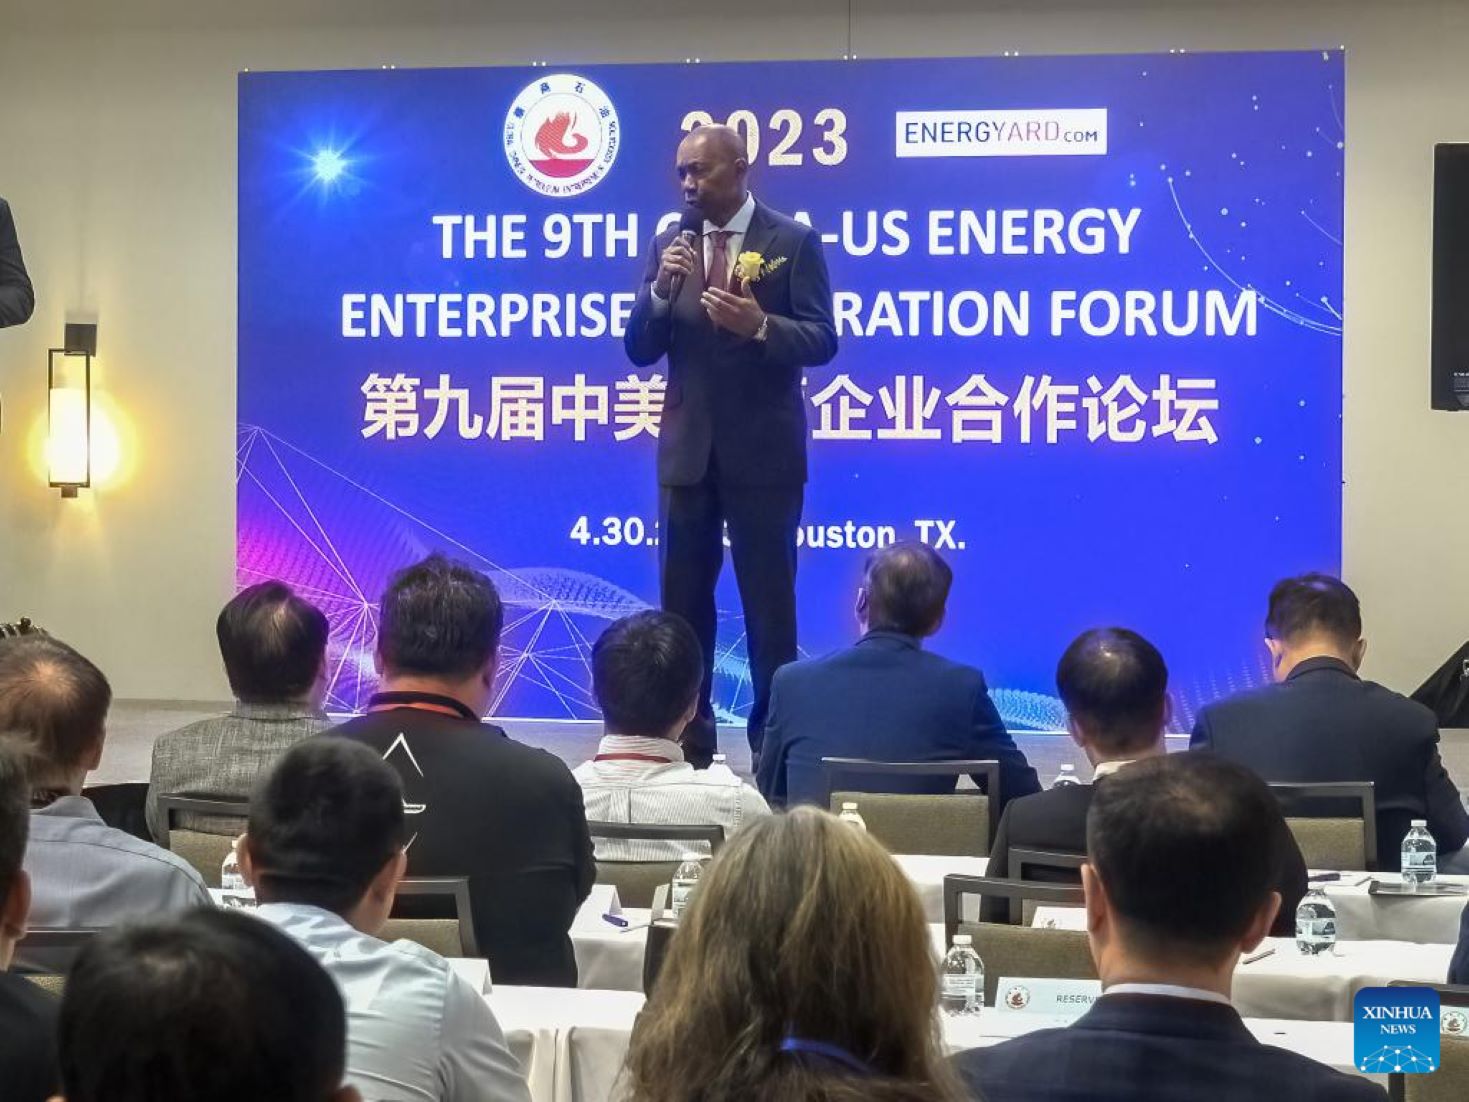 Energy Firms From China, U.S. Hold Forum To Seek Cooperation Opportunities